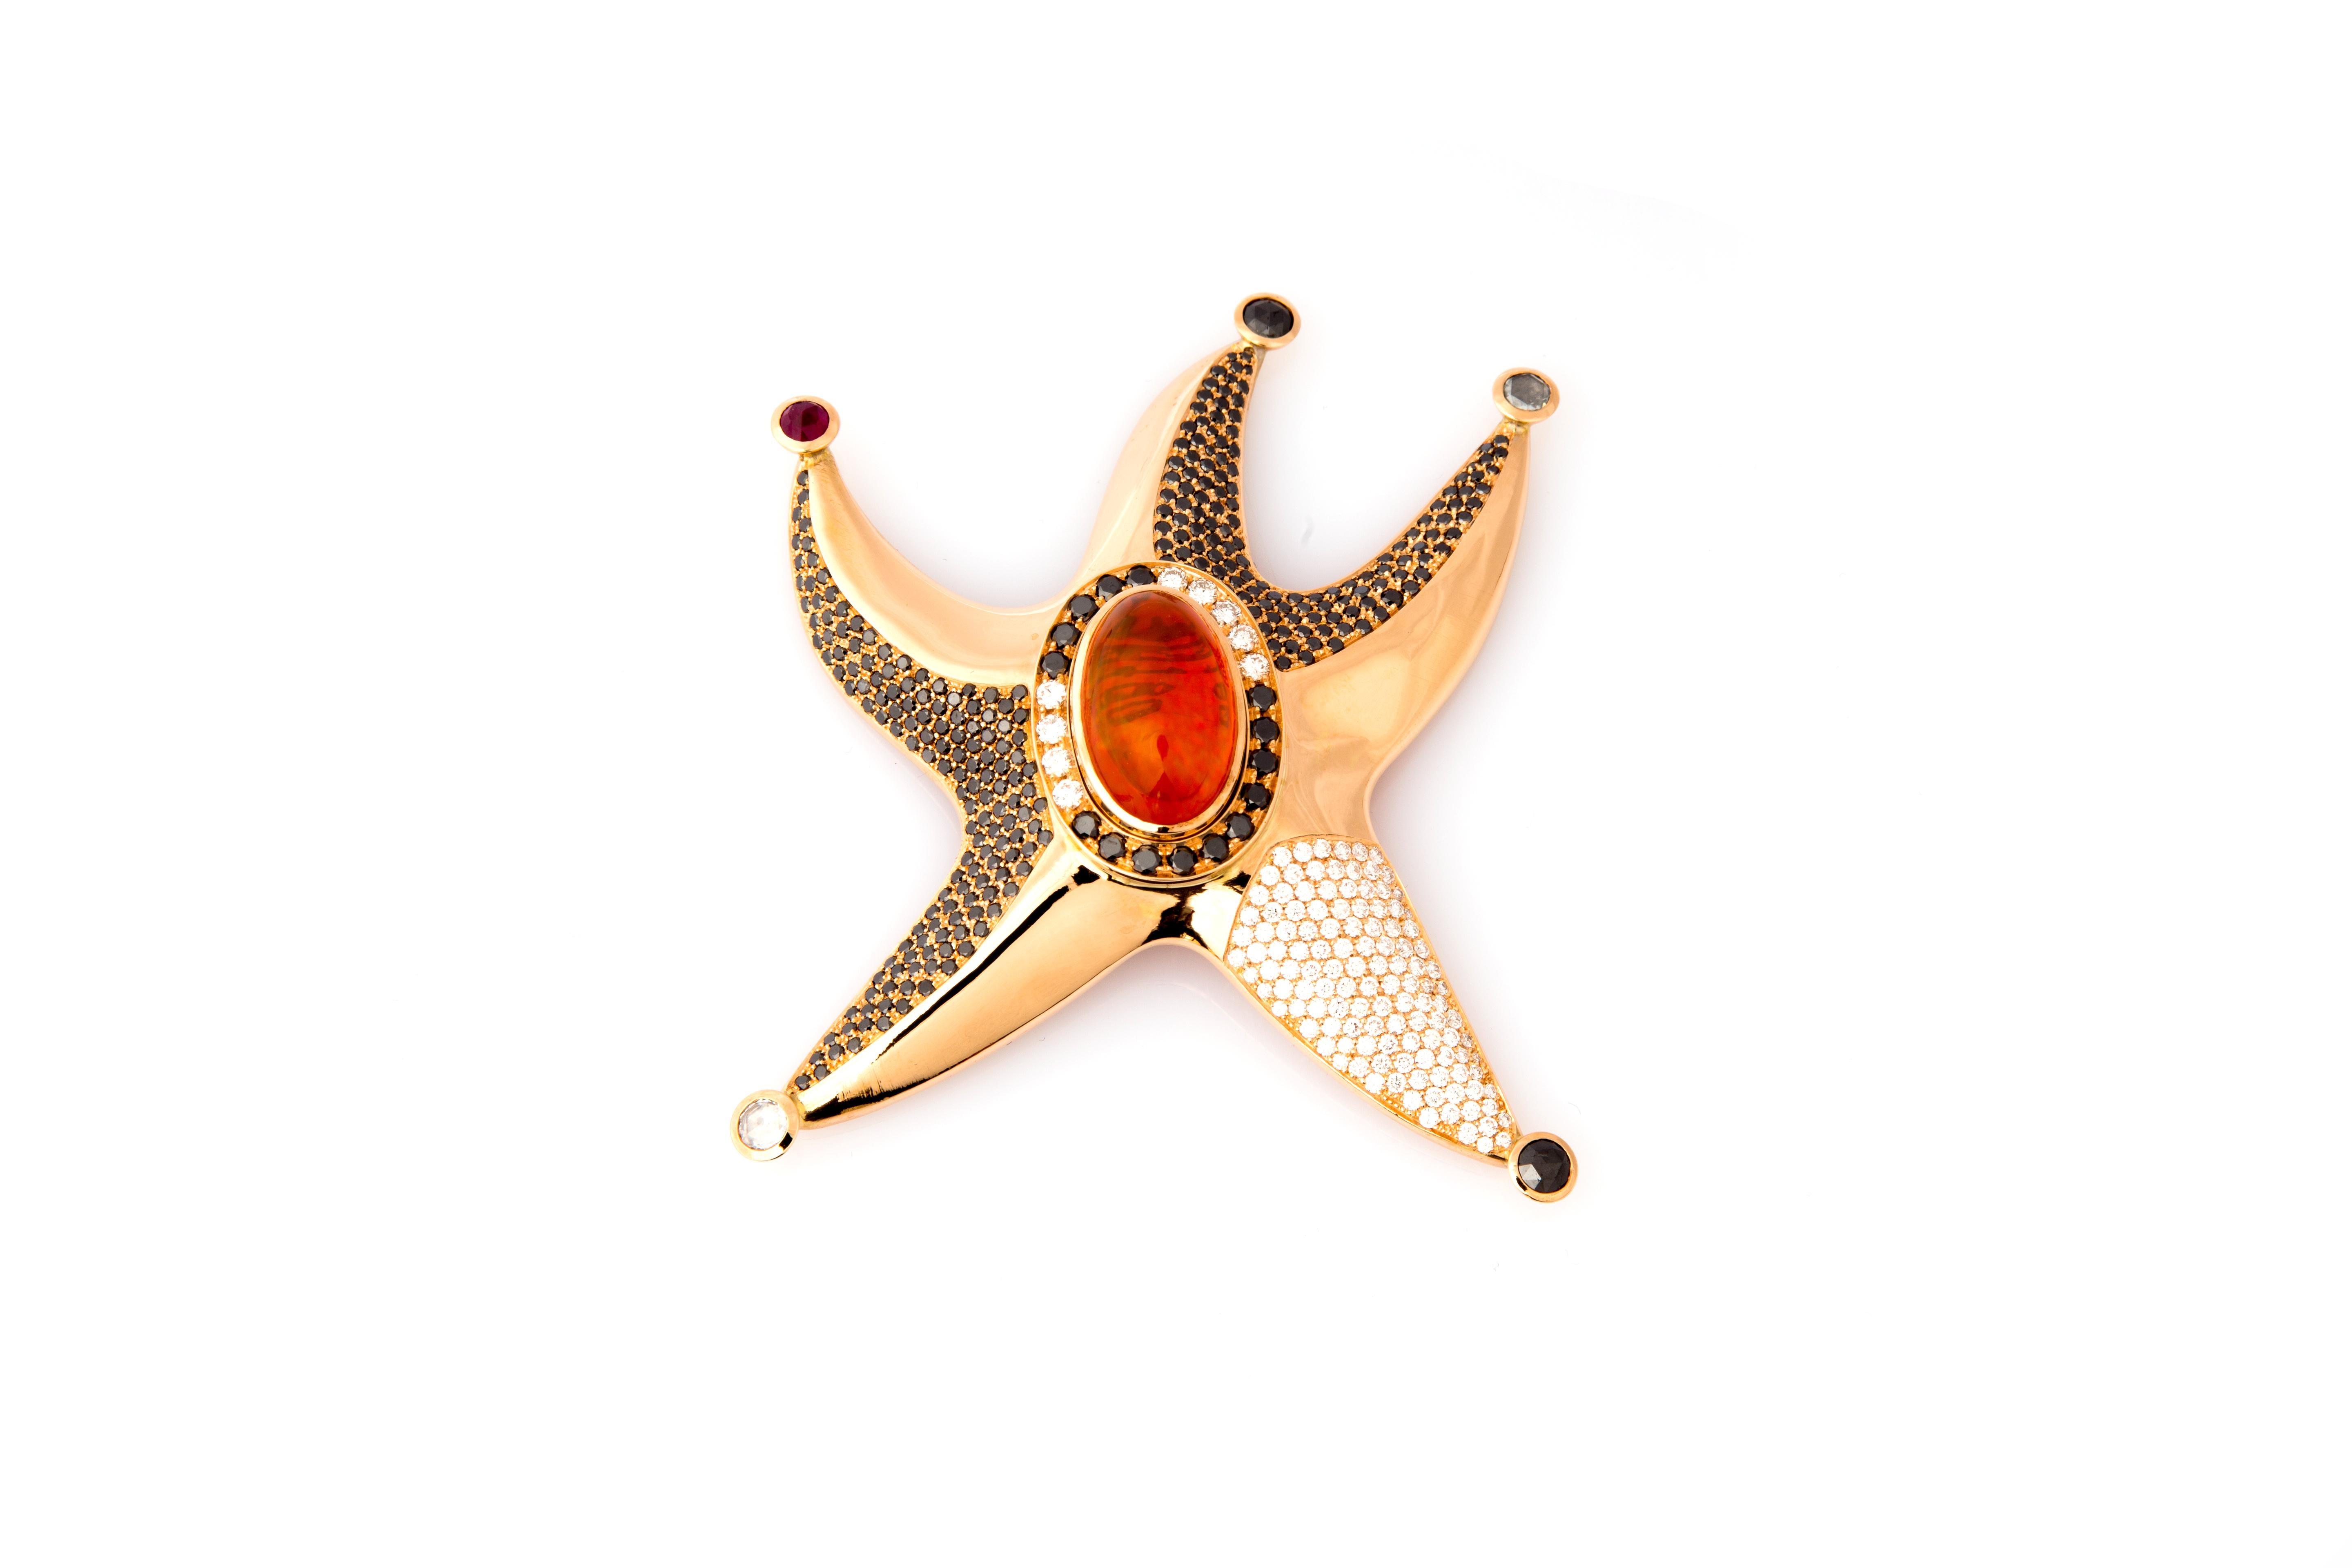 Starfish Pendant (or Brooch)
Fire Opal 15,8ct with colour play
Diamonds White 4,05ct tw/vs
Black Diamonds 4,50ct
Diamonds White (rose cut) 1,05ct
Rubies 0,64ct
Red Gold 18K 
- can also be transfomed into a brooch (takes approx 2 weeks without